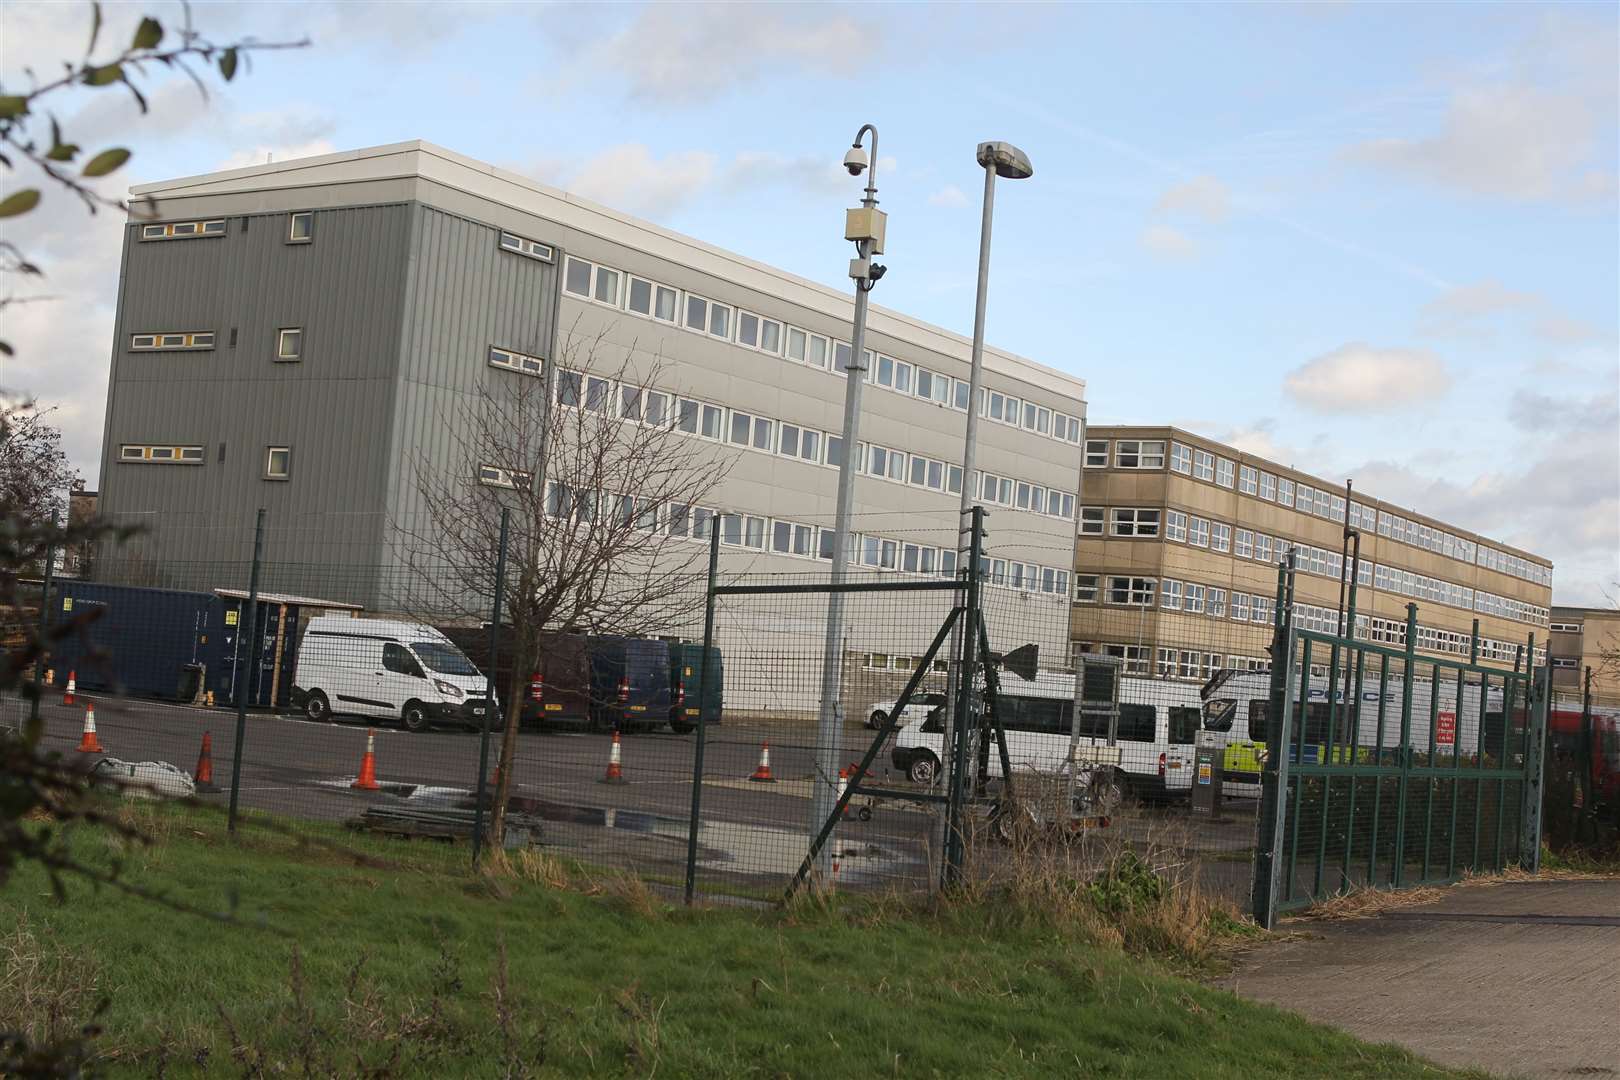 The incident was alleged to have happened at this police training centre. Library picture: John Westhrop for KMG